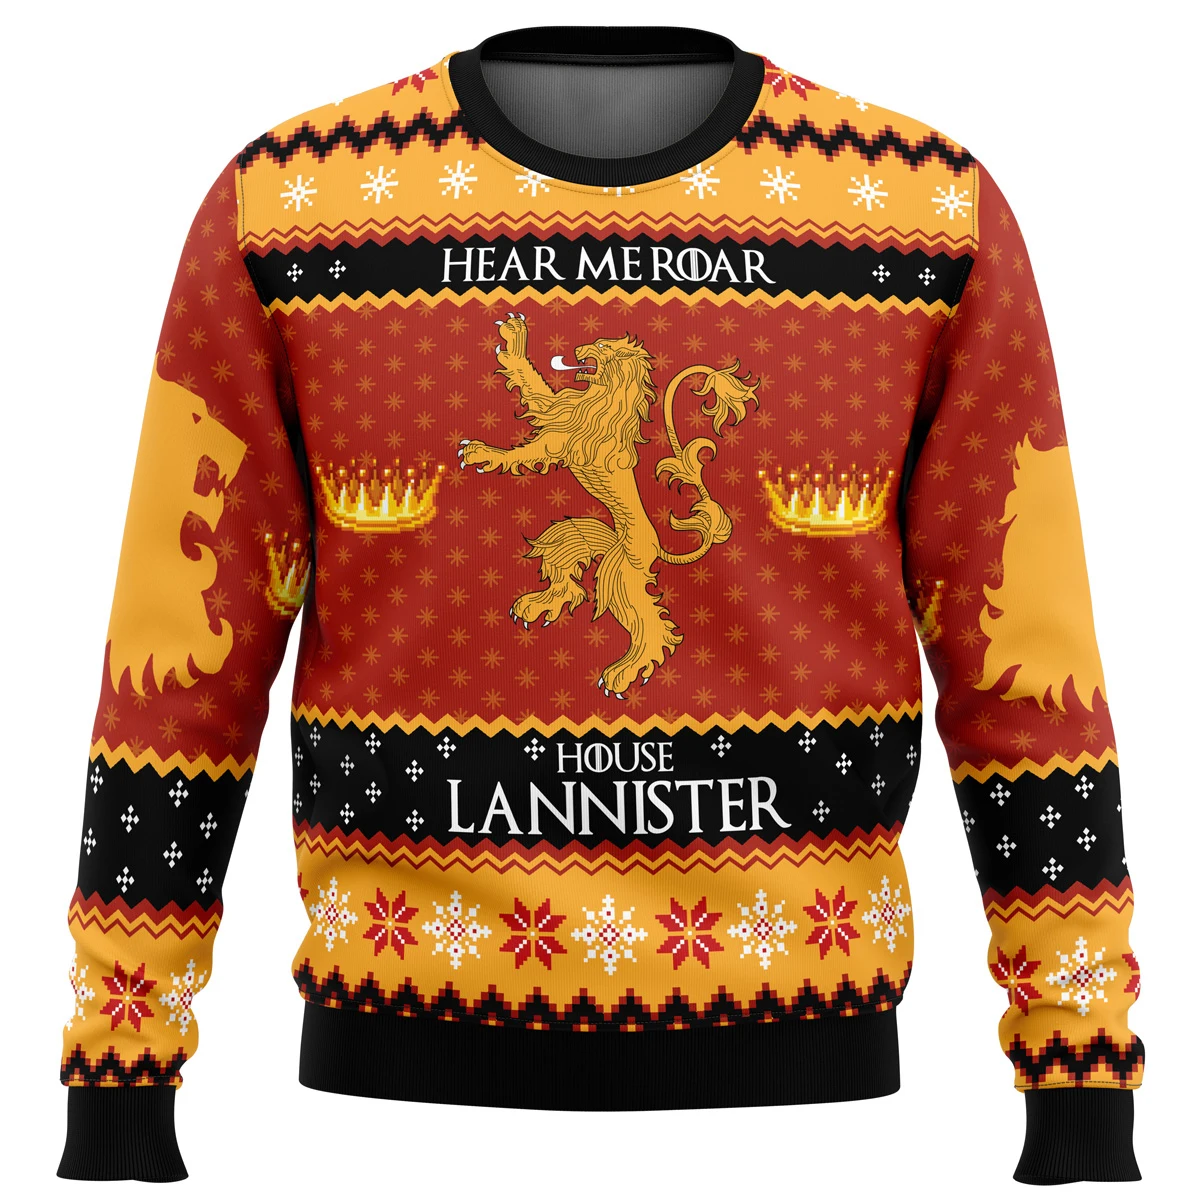 Game Of Thrones Christmas Is Coming Ugly Christmas Sweatshirt Gift Santa Claus Pullover Autumn Winter Men 15 - Game Of Thrones Shop